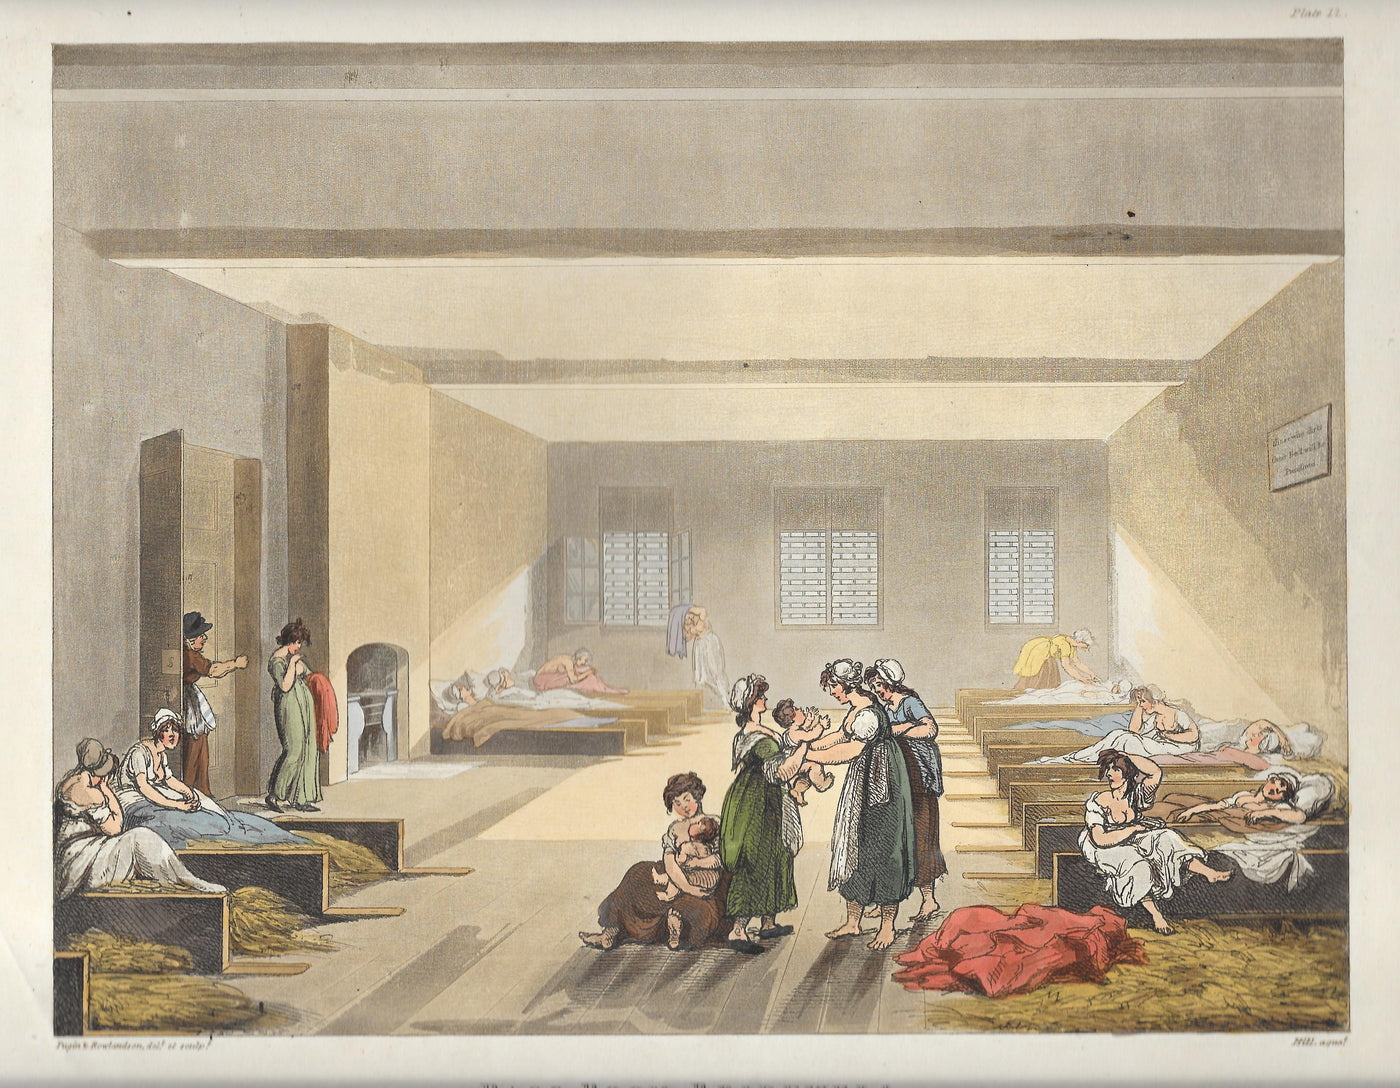 Bridewell Prison Pass Room Blackfriars London antique hand-coloured aquatint published 1808.